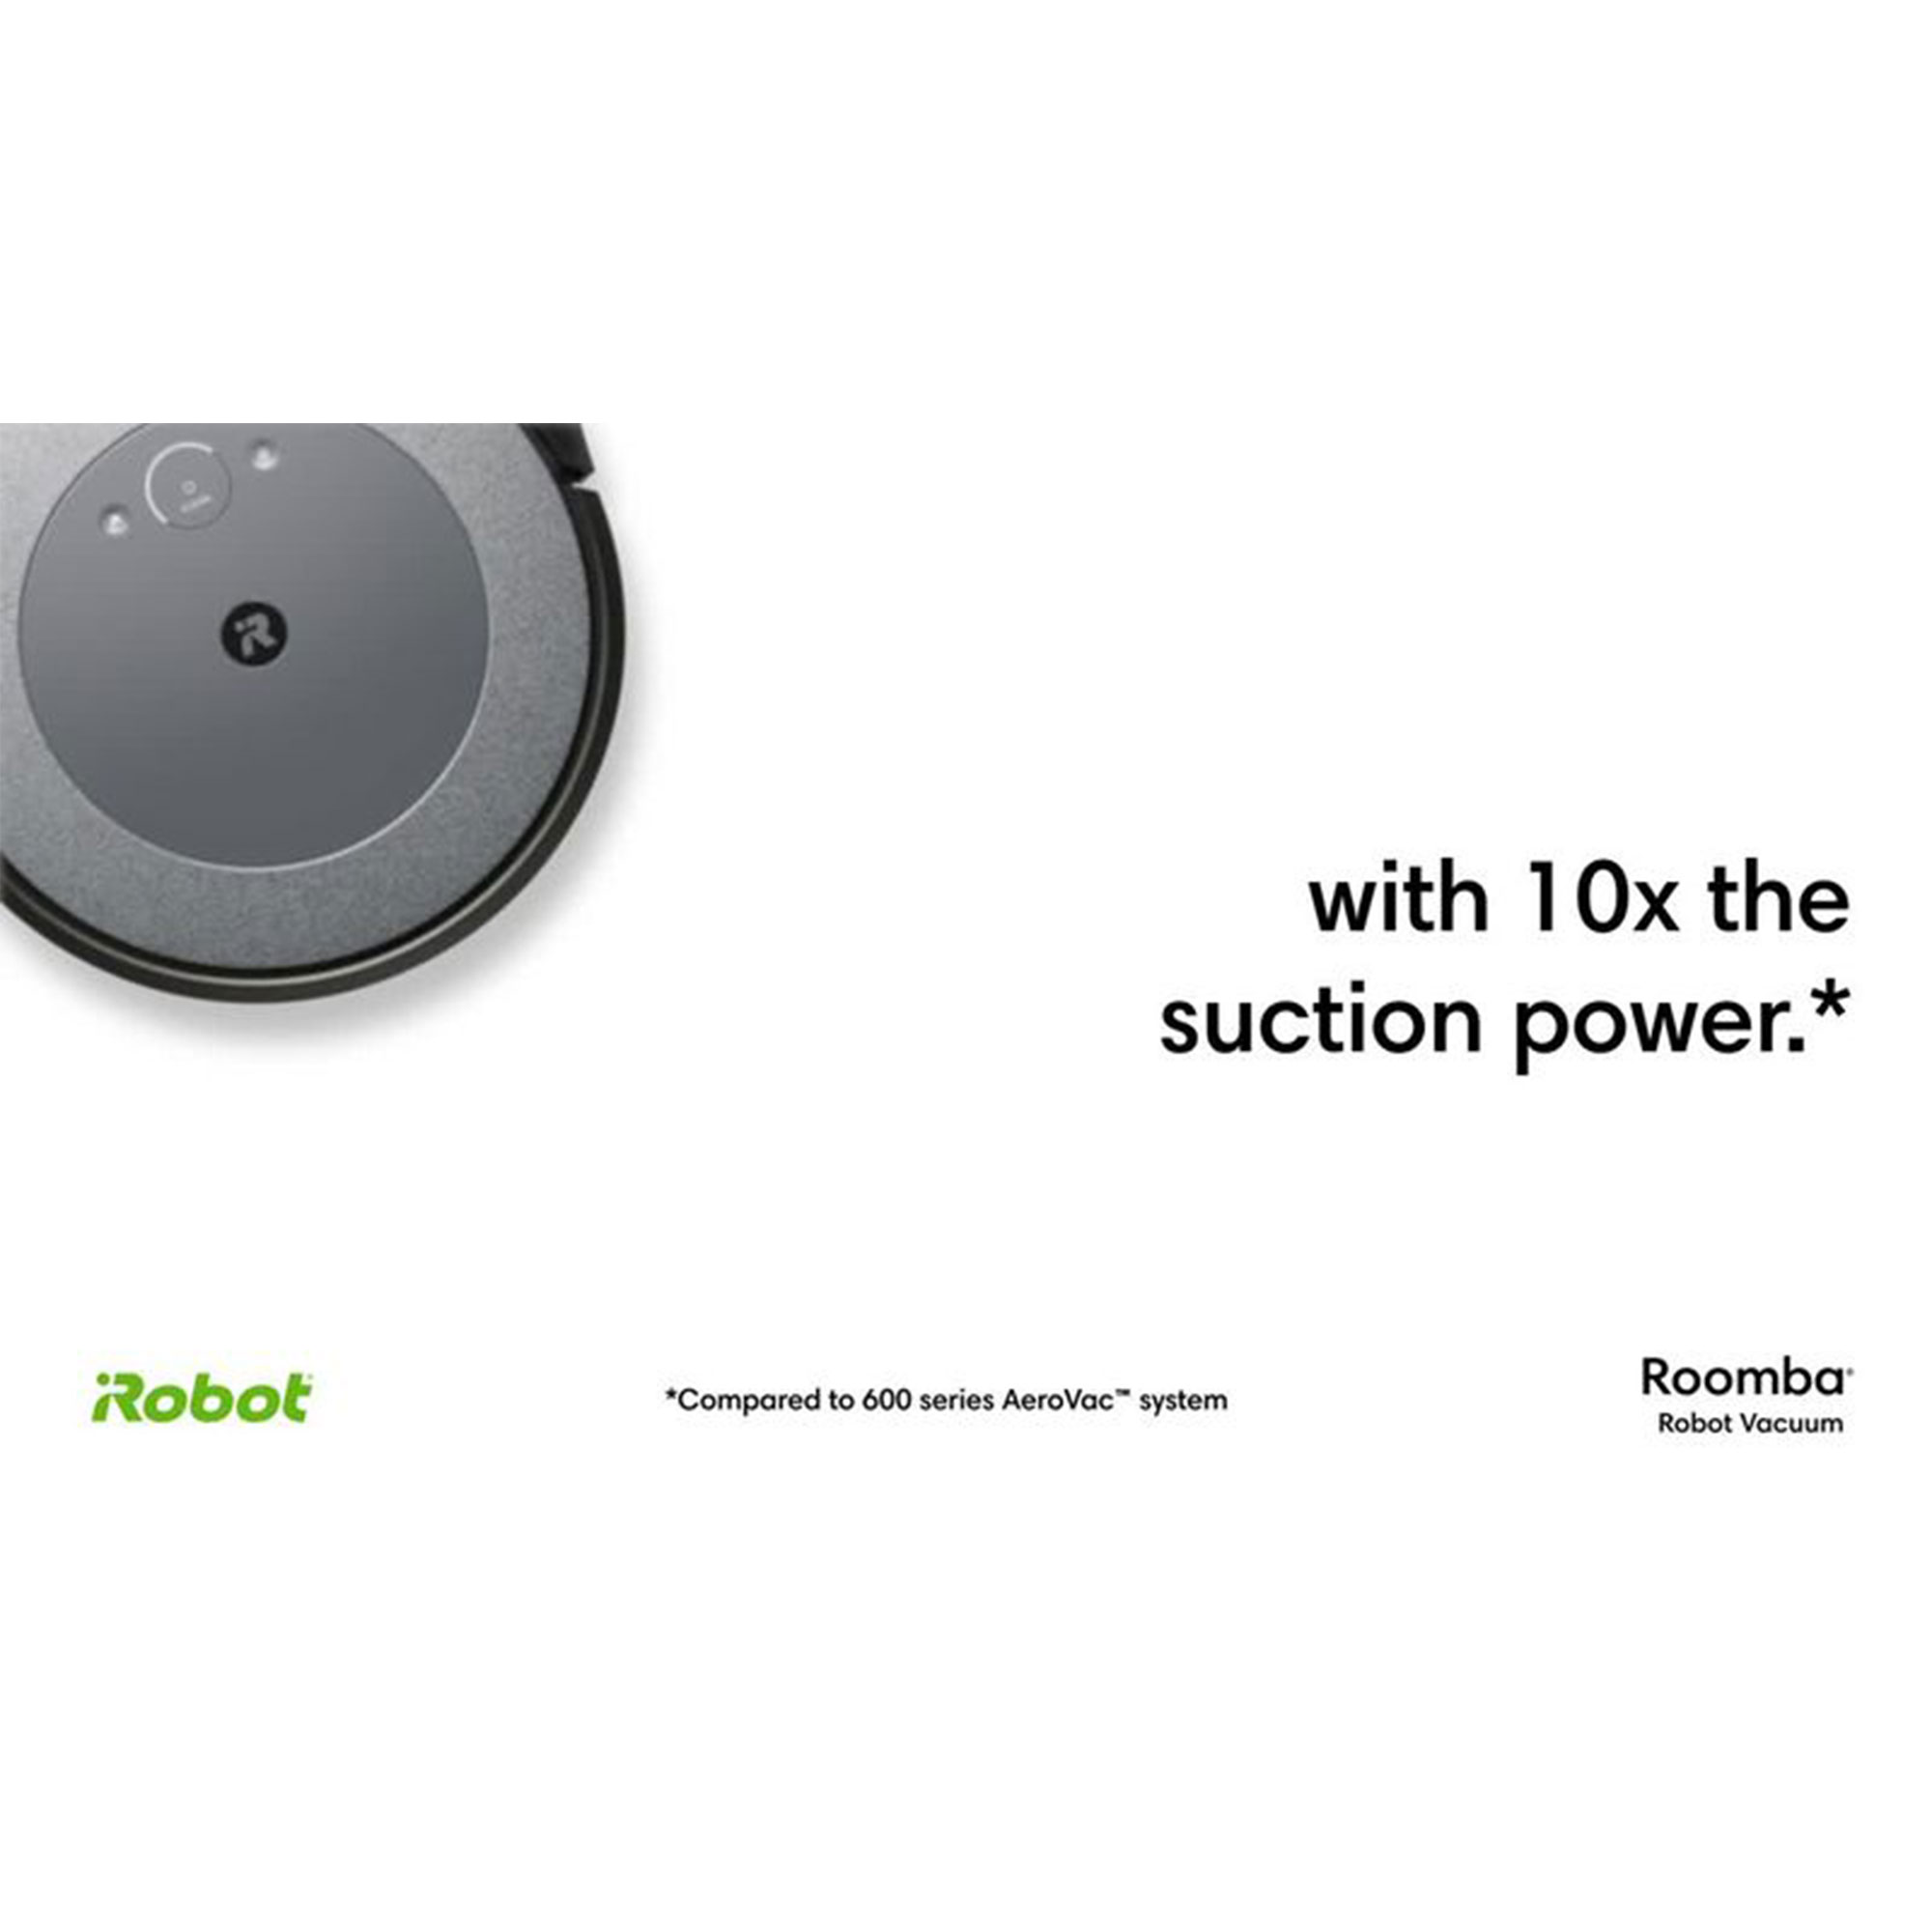 iRobot Introduces the Roomba® Its Self-Emptying Product Lineup